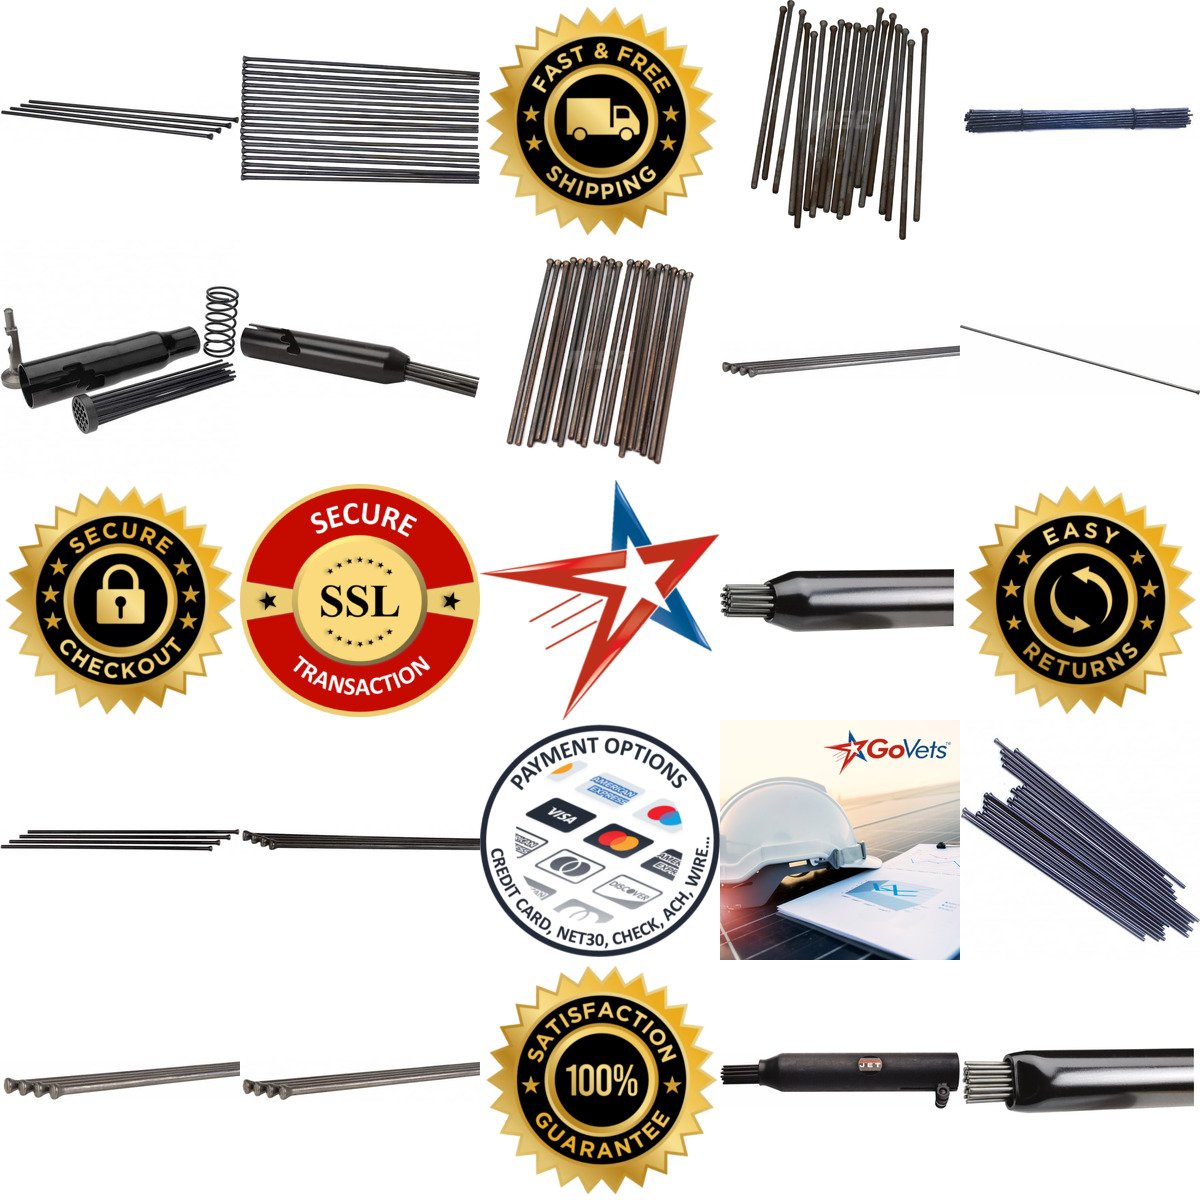 A selection of Needle Scaler Replacement Needles products on GoVets